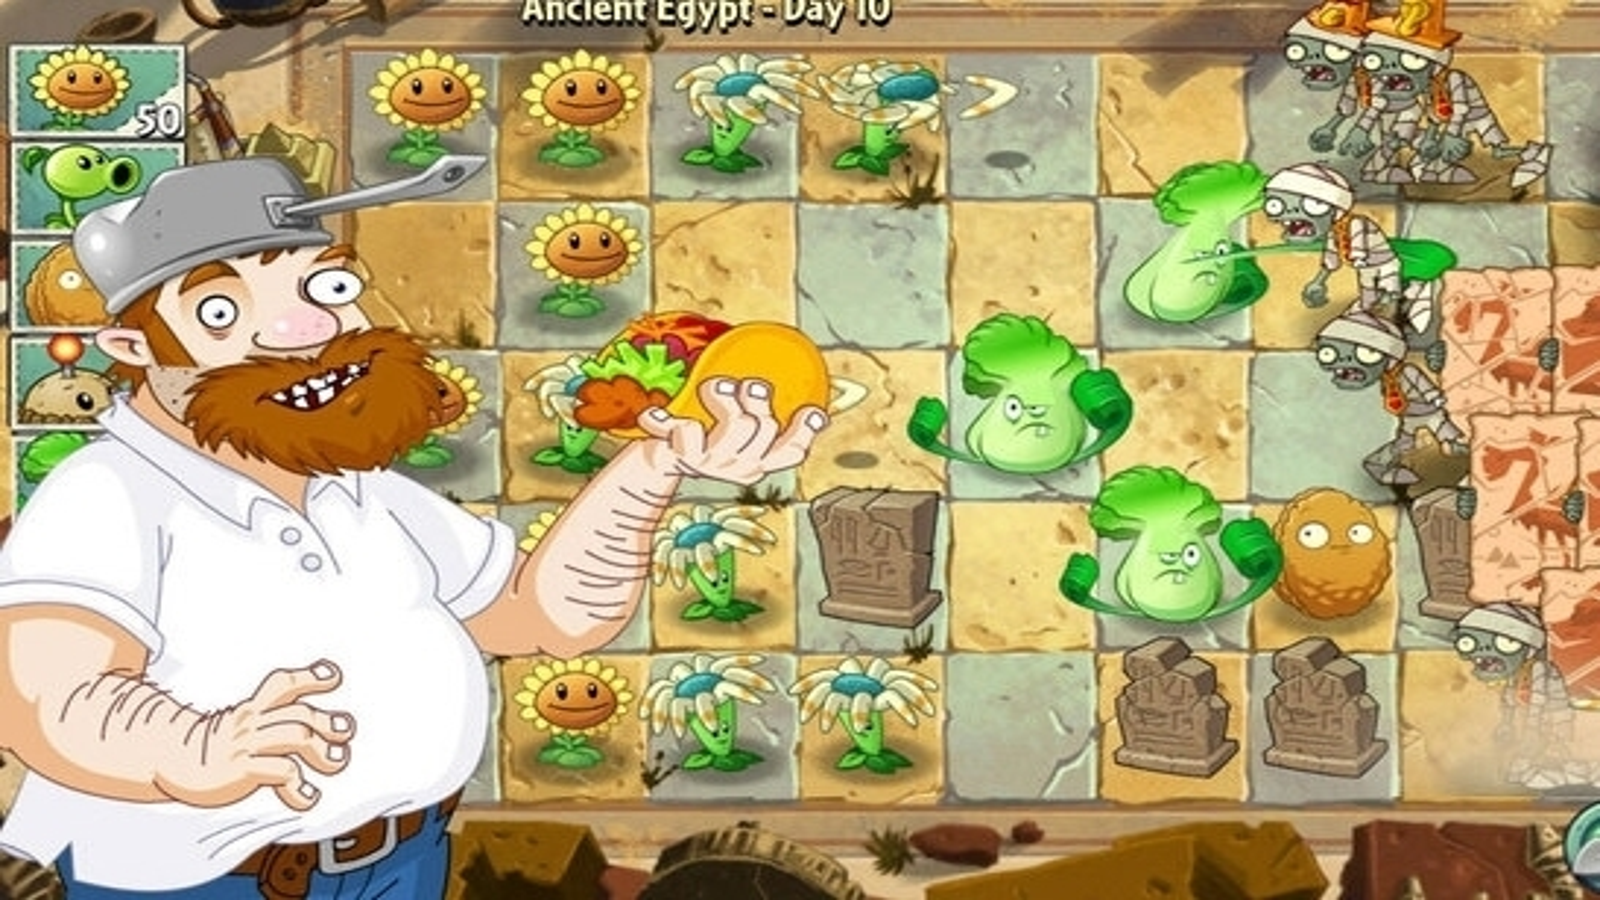 HACK Plants vs Zombies 2 - Purchased all Plants, Coins and Gems! 